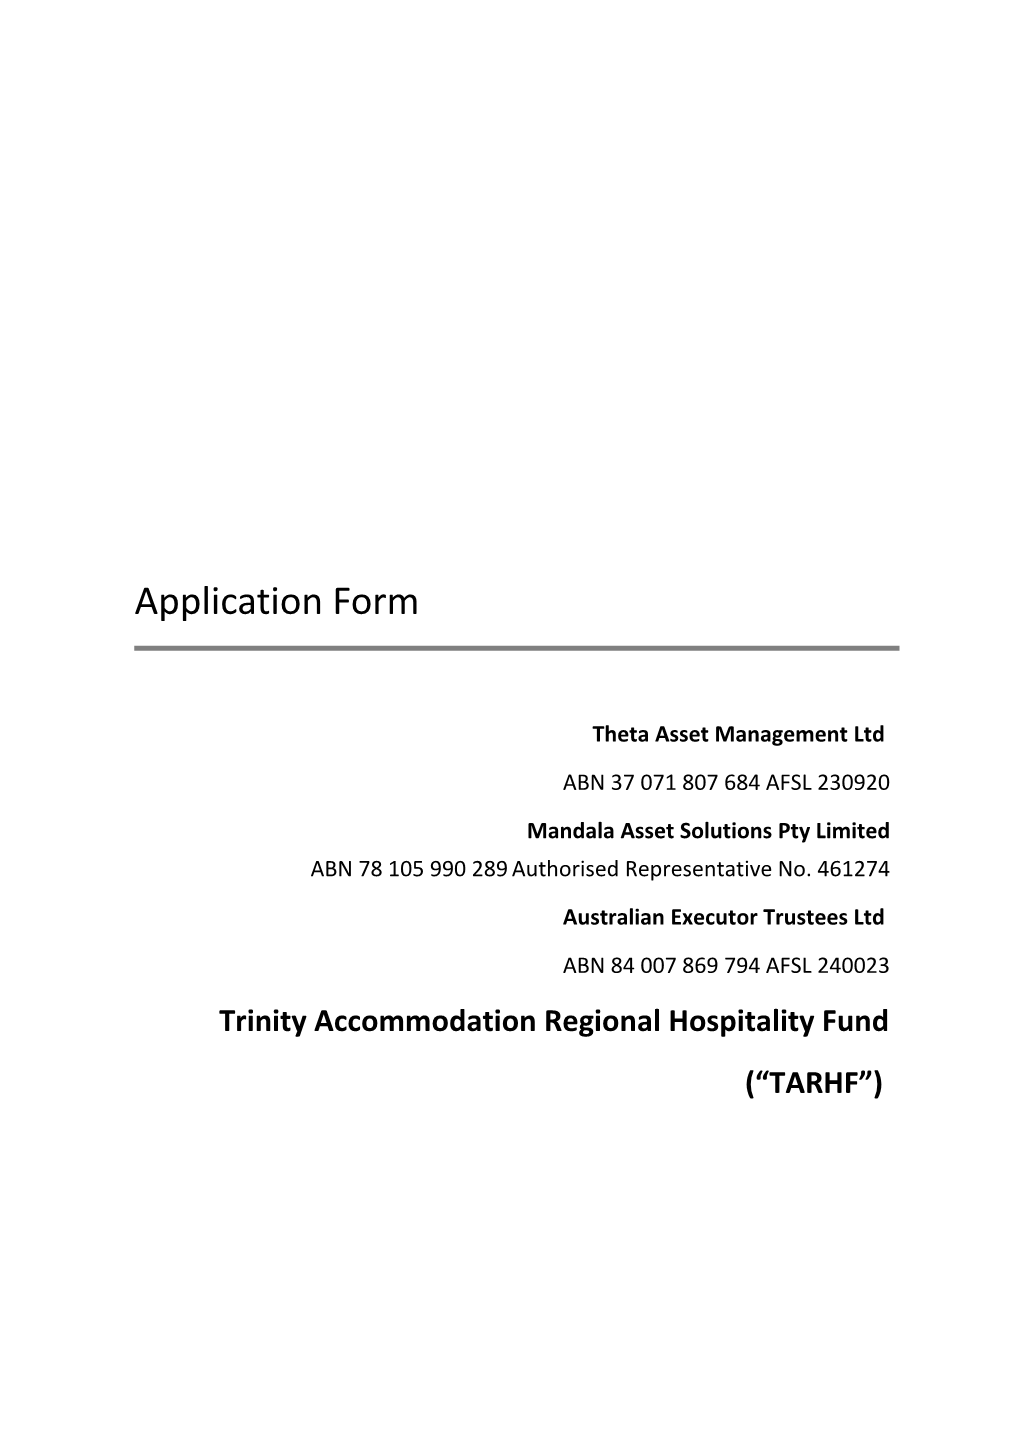 Application Form s81